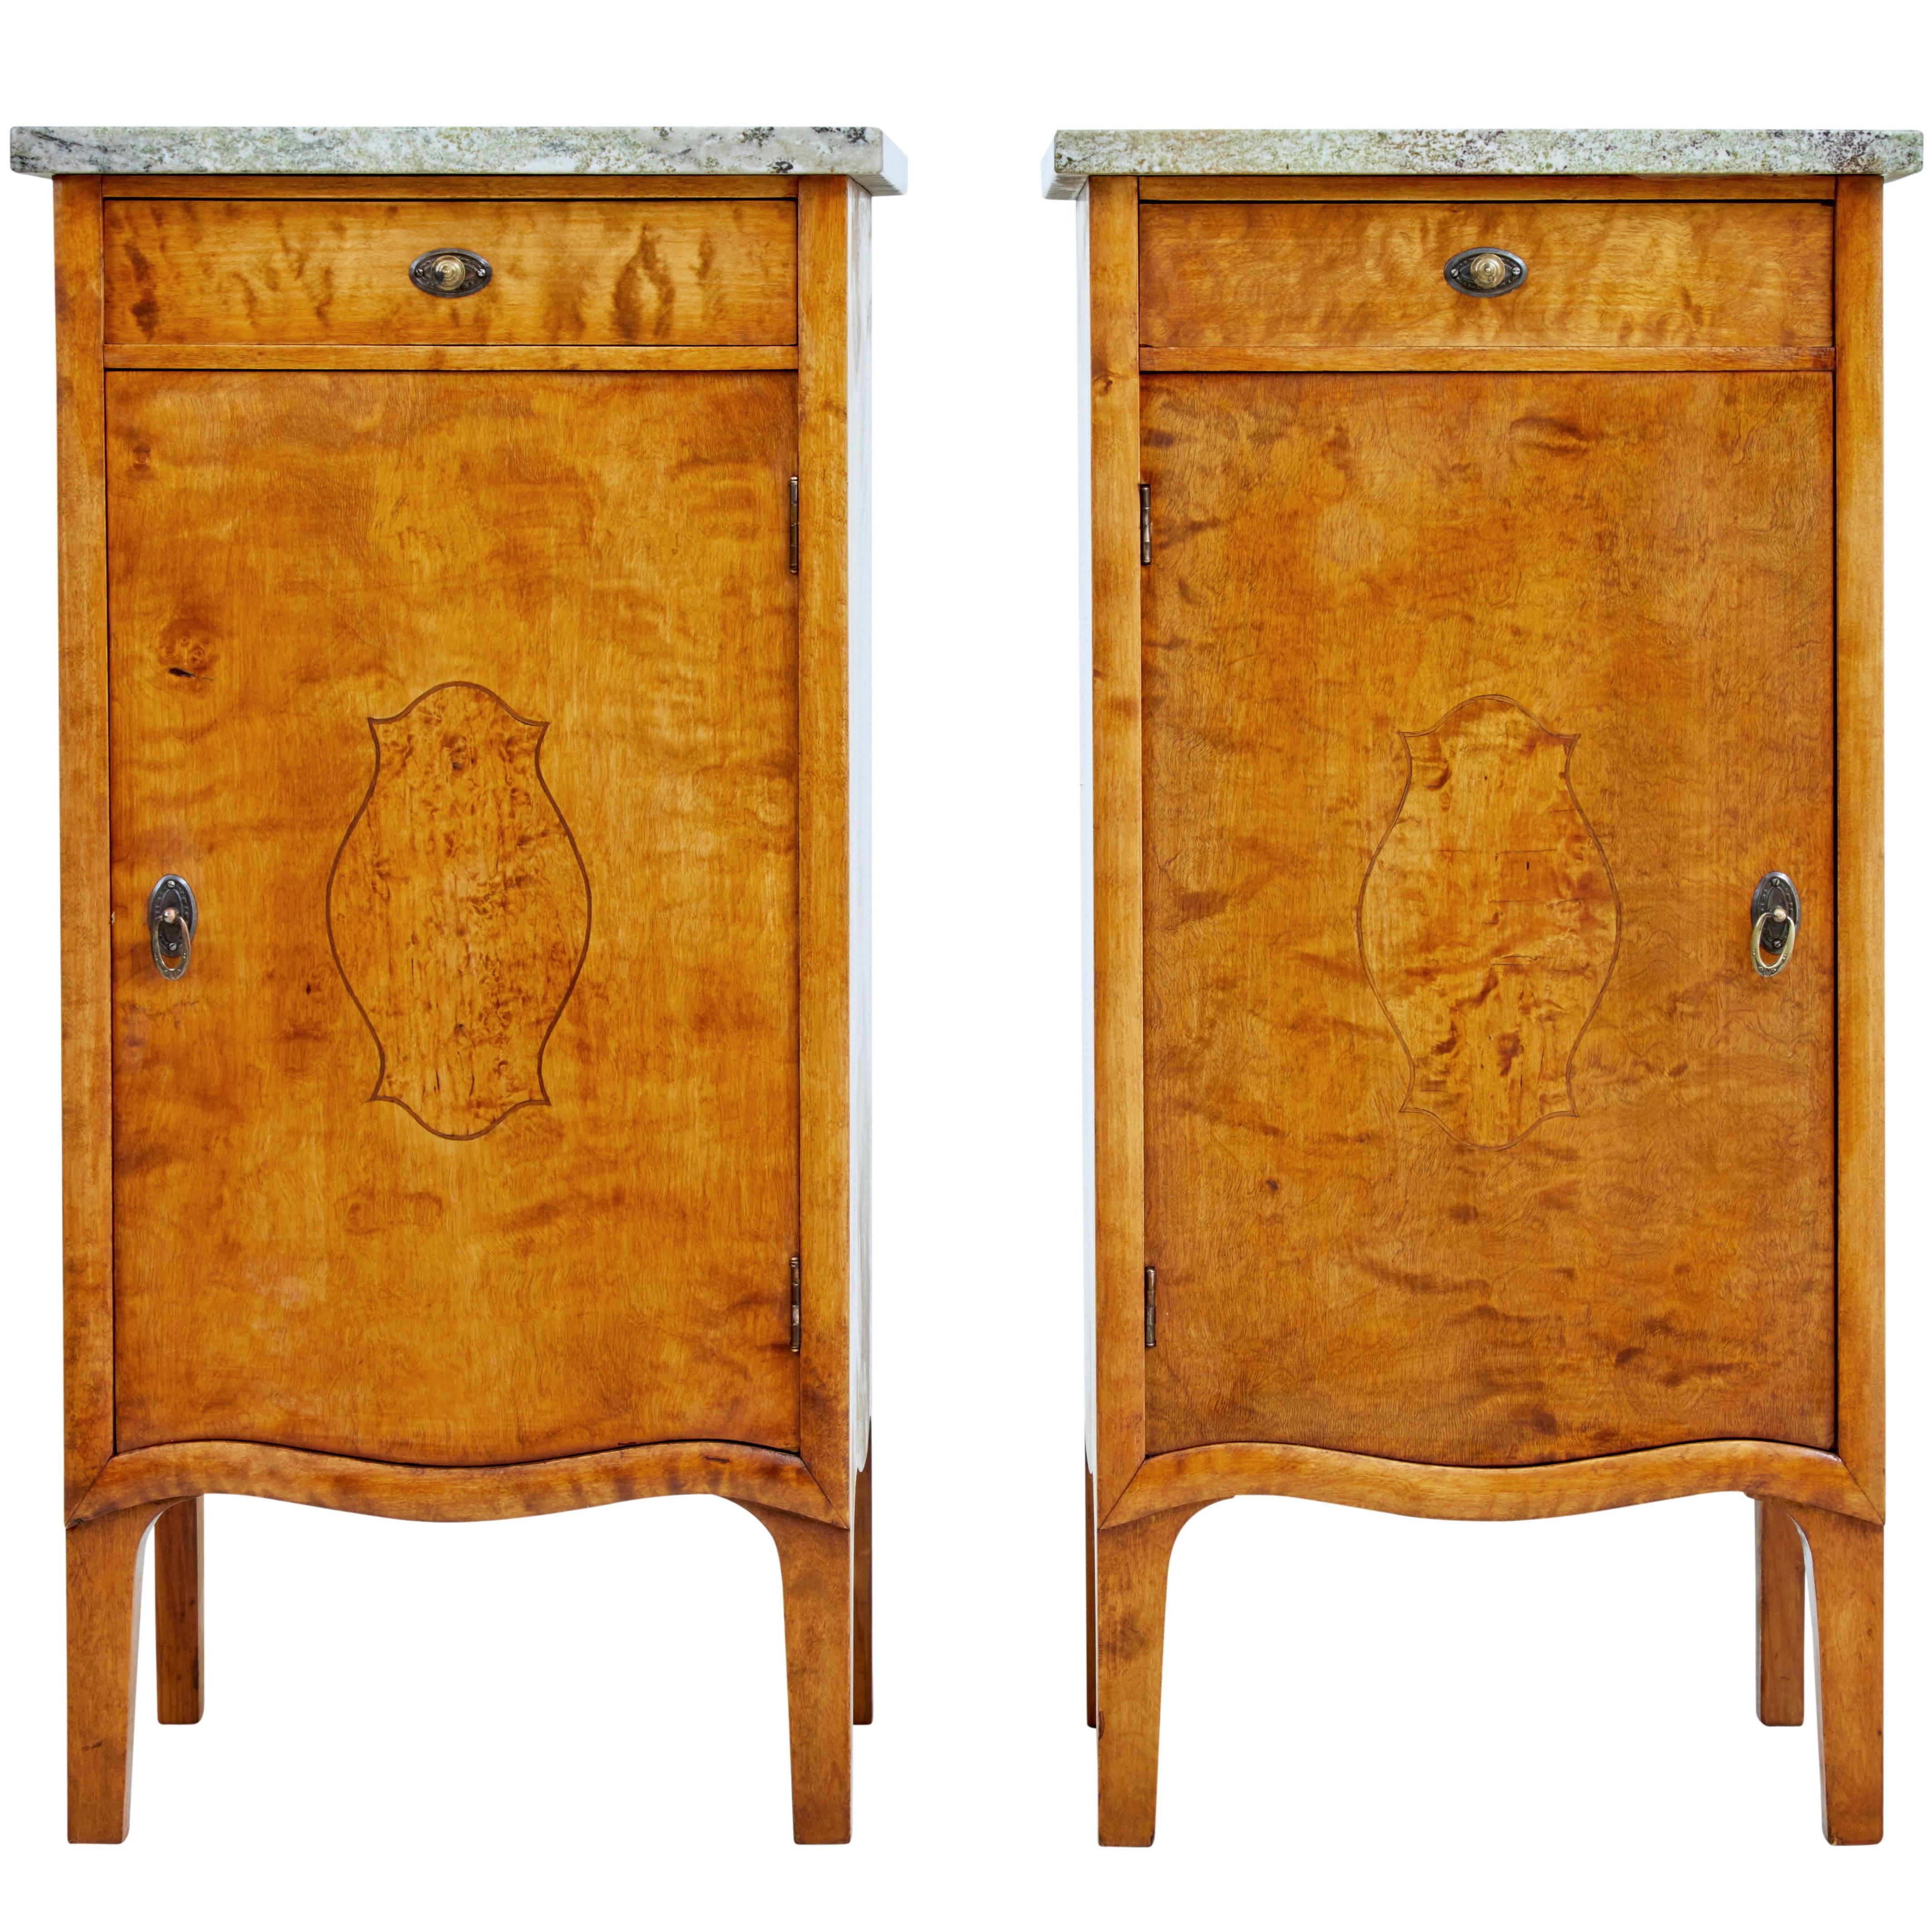 Pair of Early 20th Century Birch Art Nouveau Bedside Cupboards